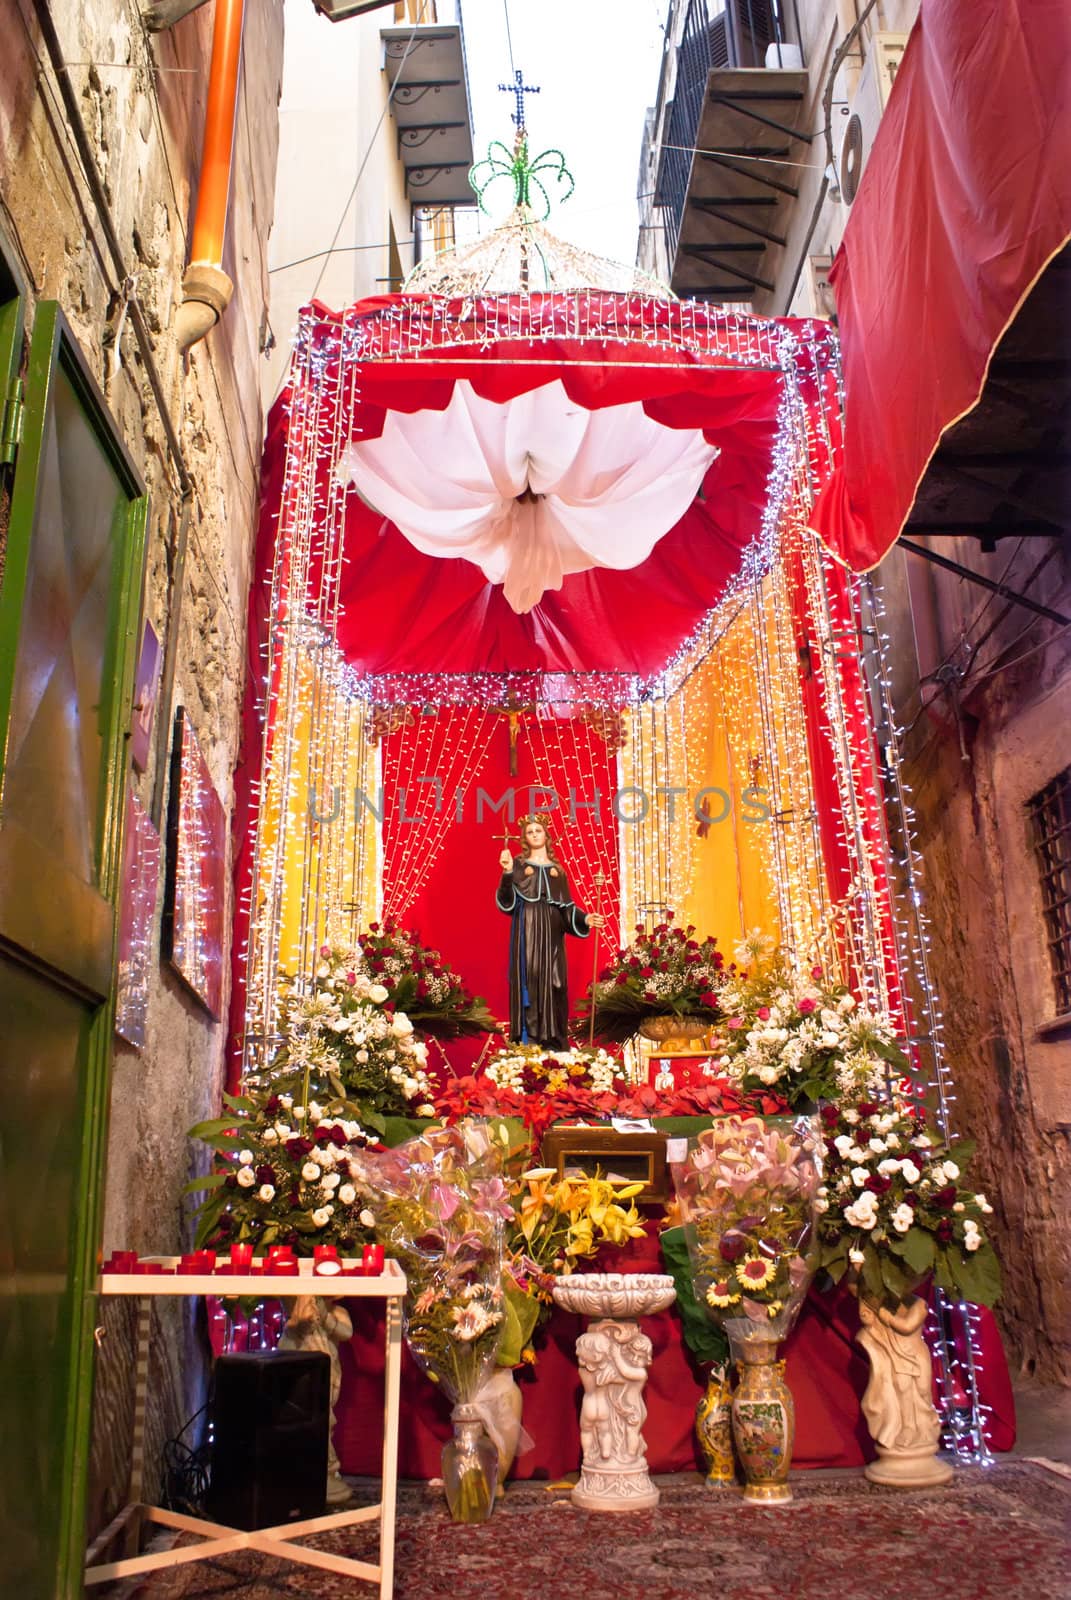 Santuzza S. Rosalia decorated with flowers for the feast in Palermo. 